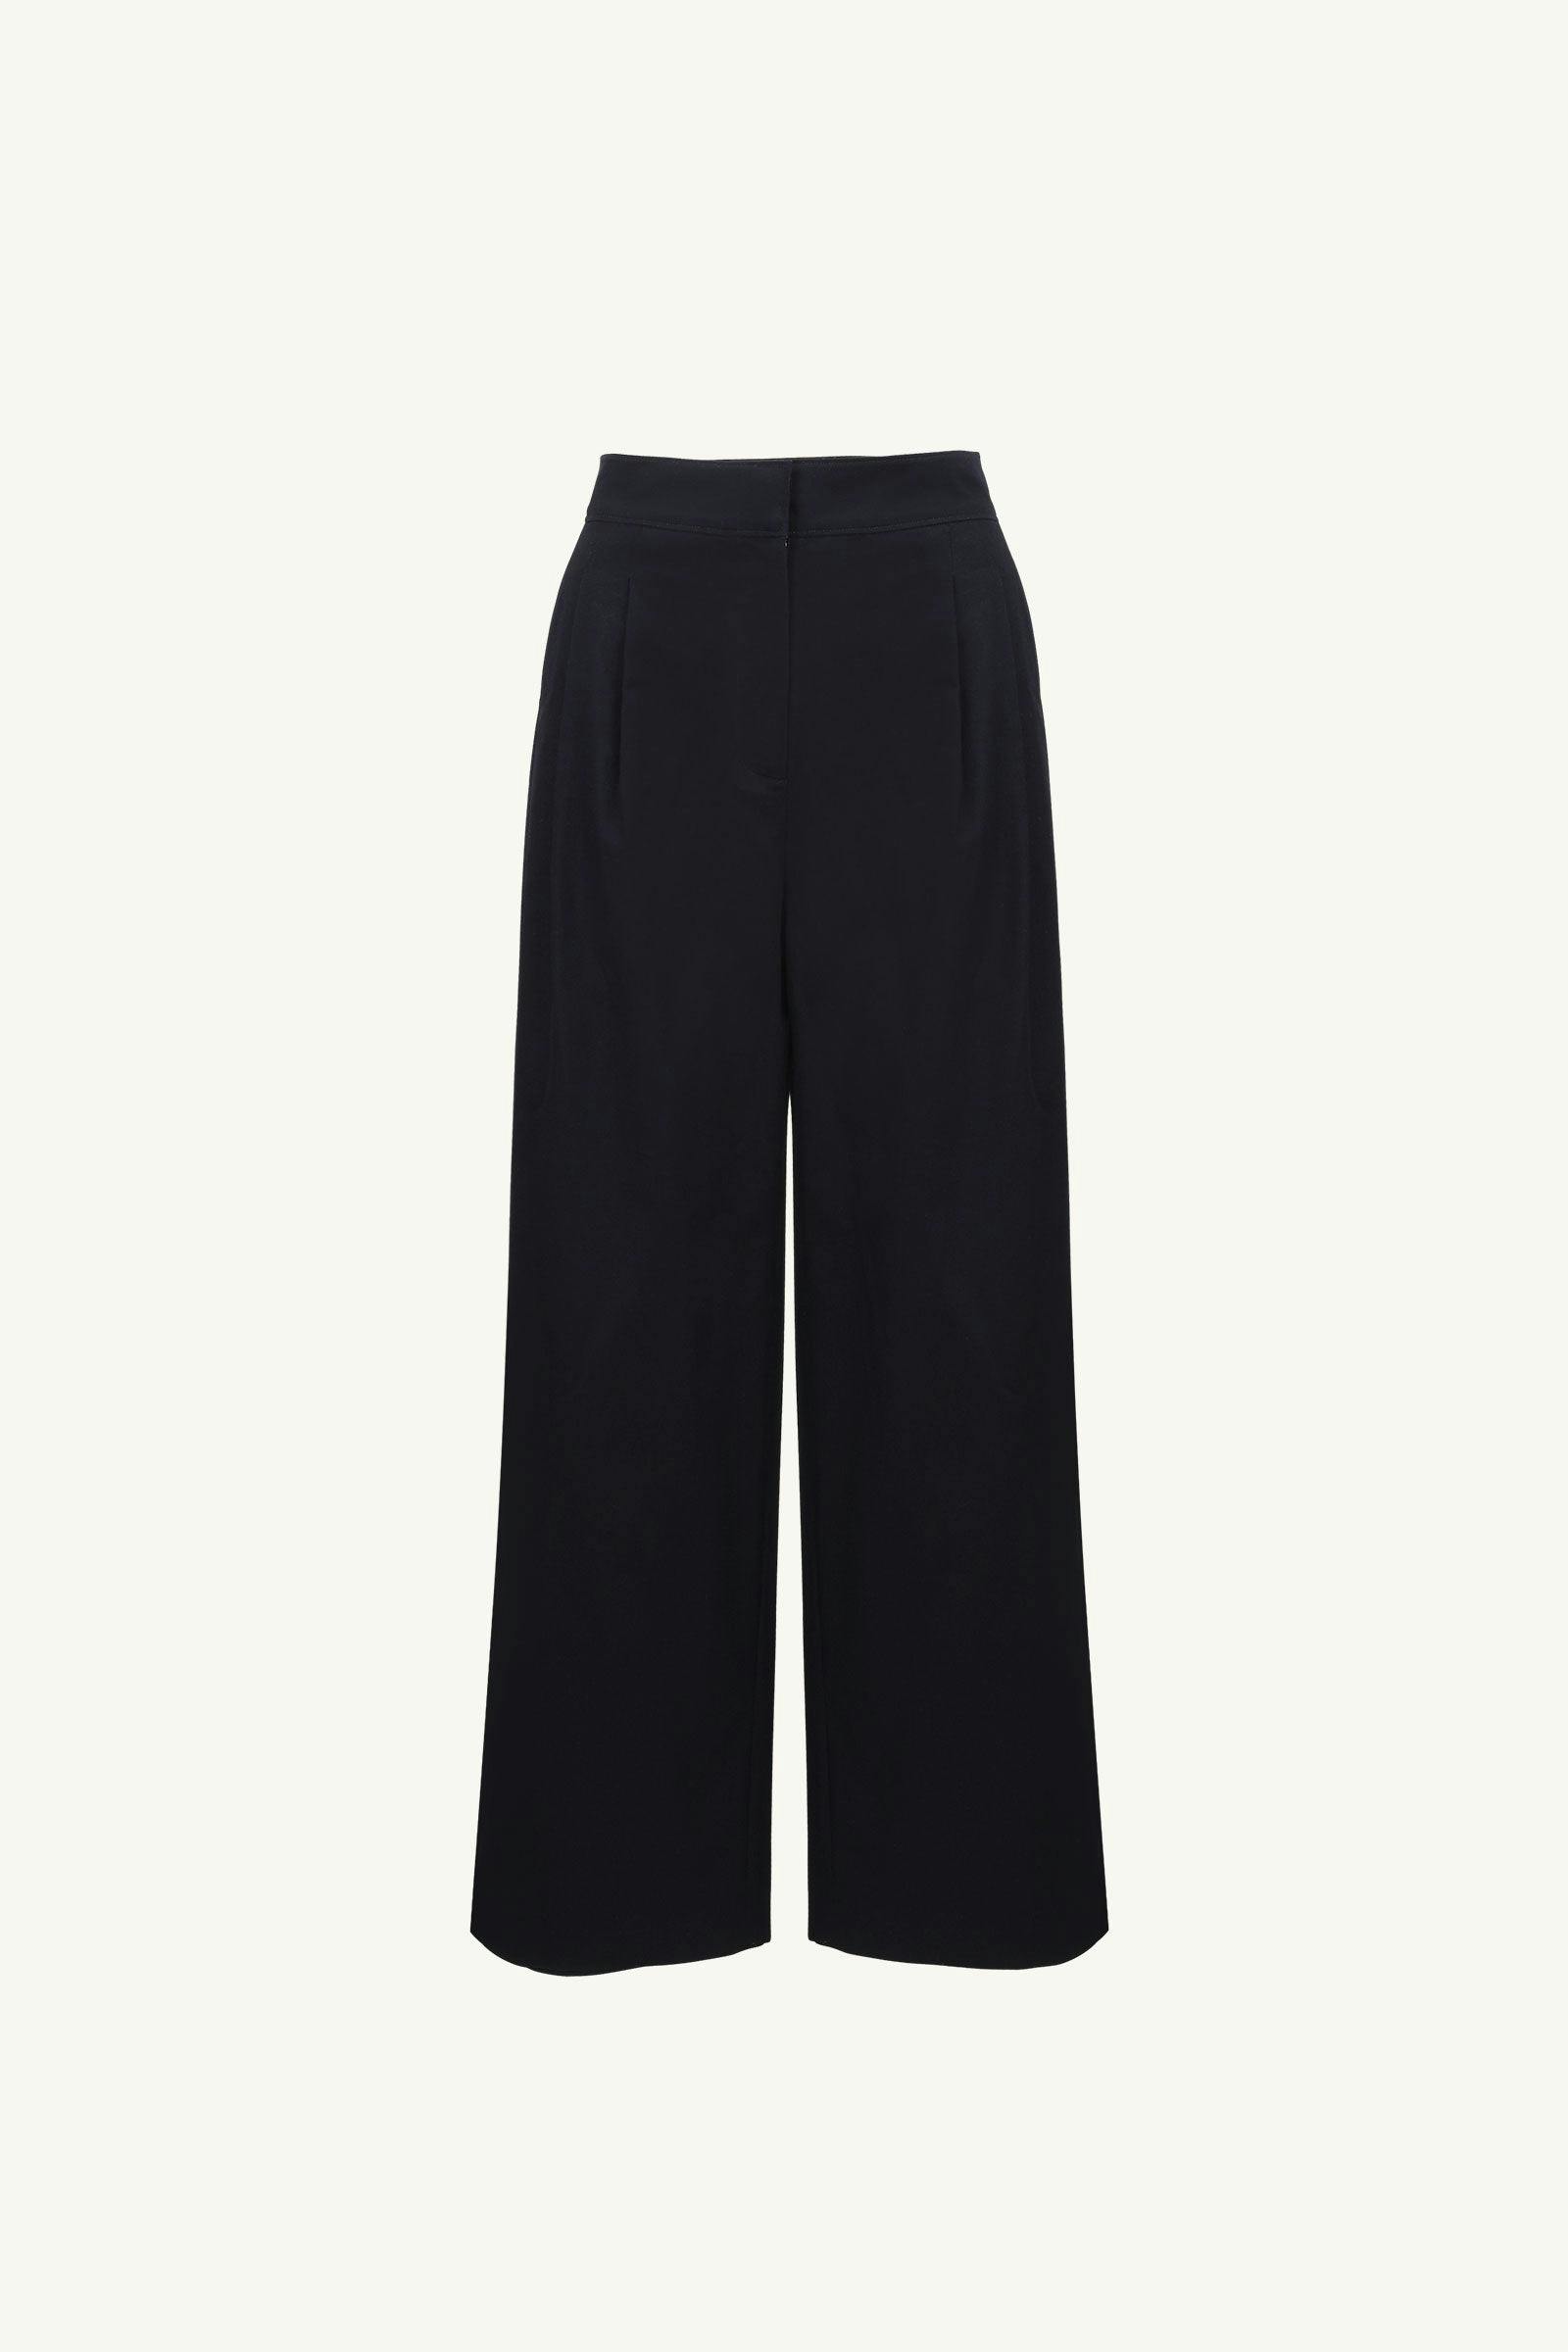 4th / Gallery Trousers -- Organic Cotton Twill